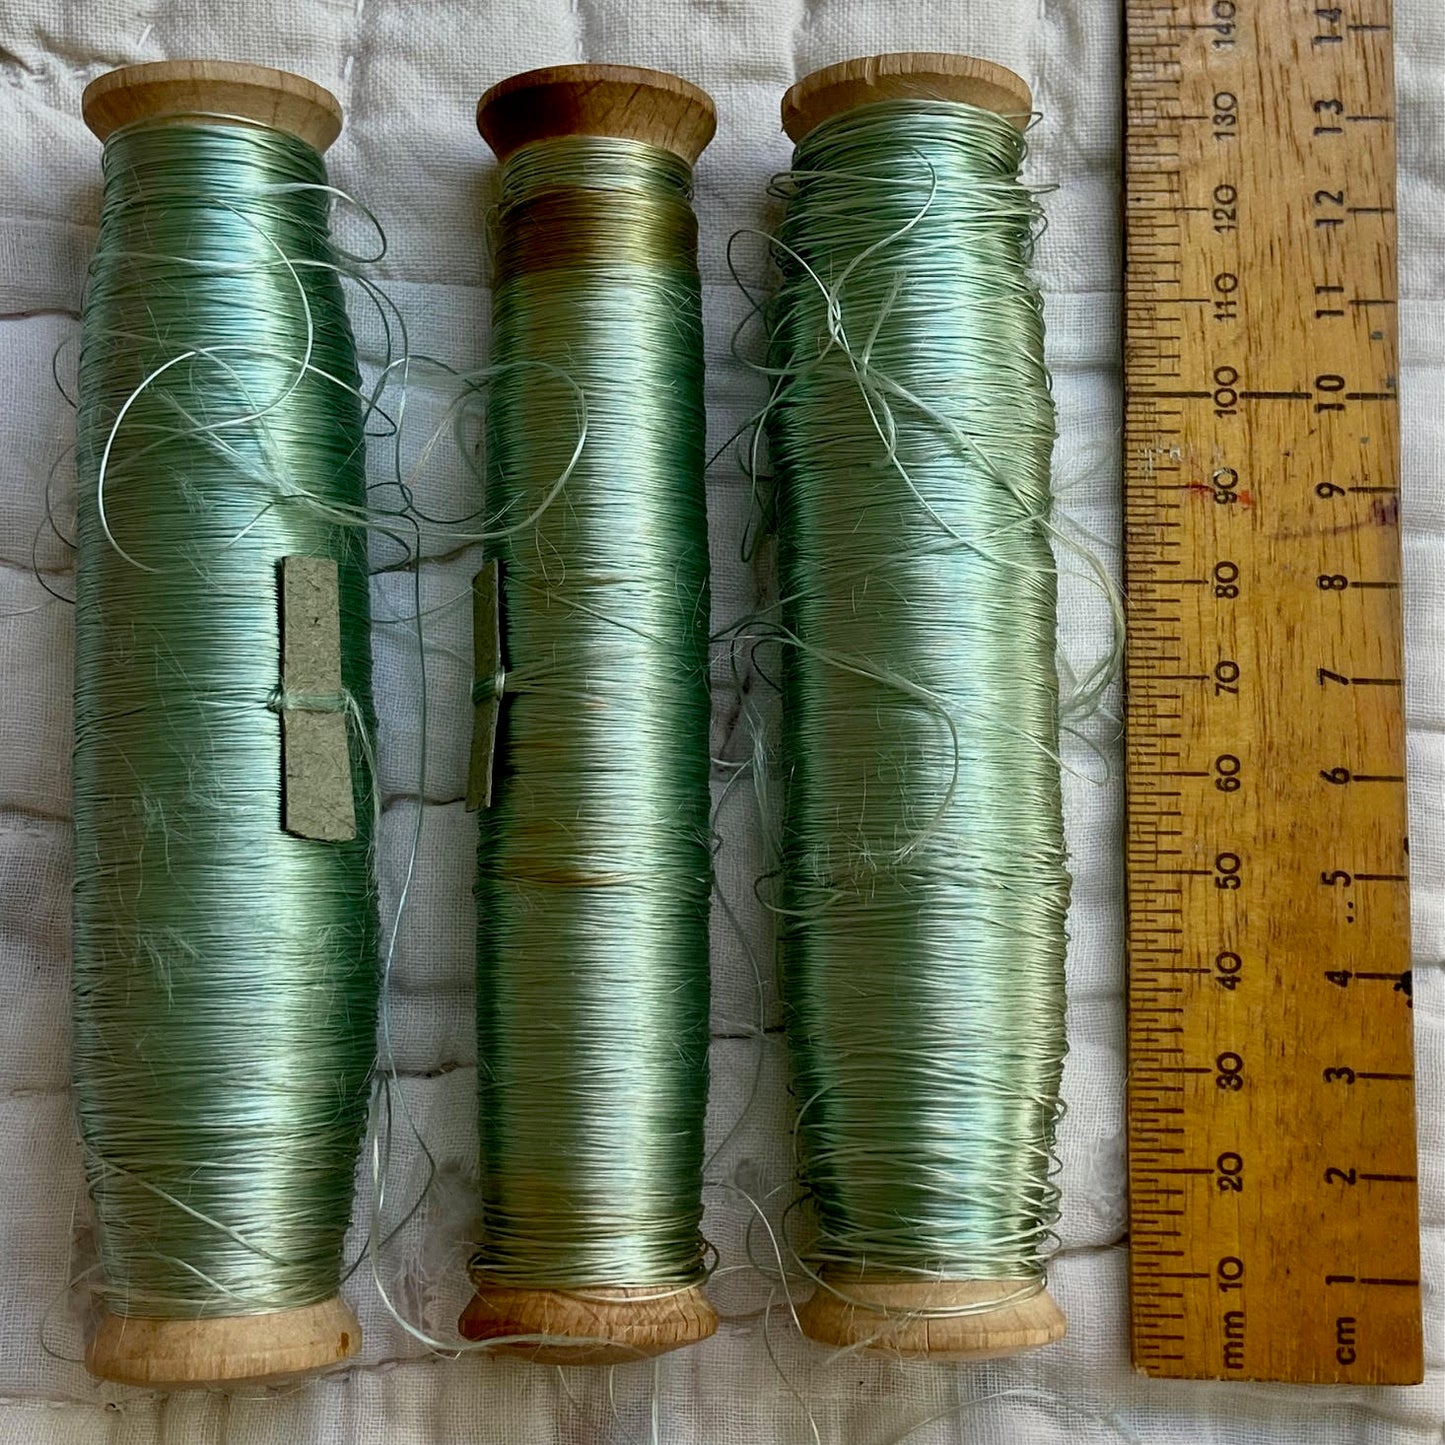 French Wooden Spools with Silk Threads - Item 23482